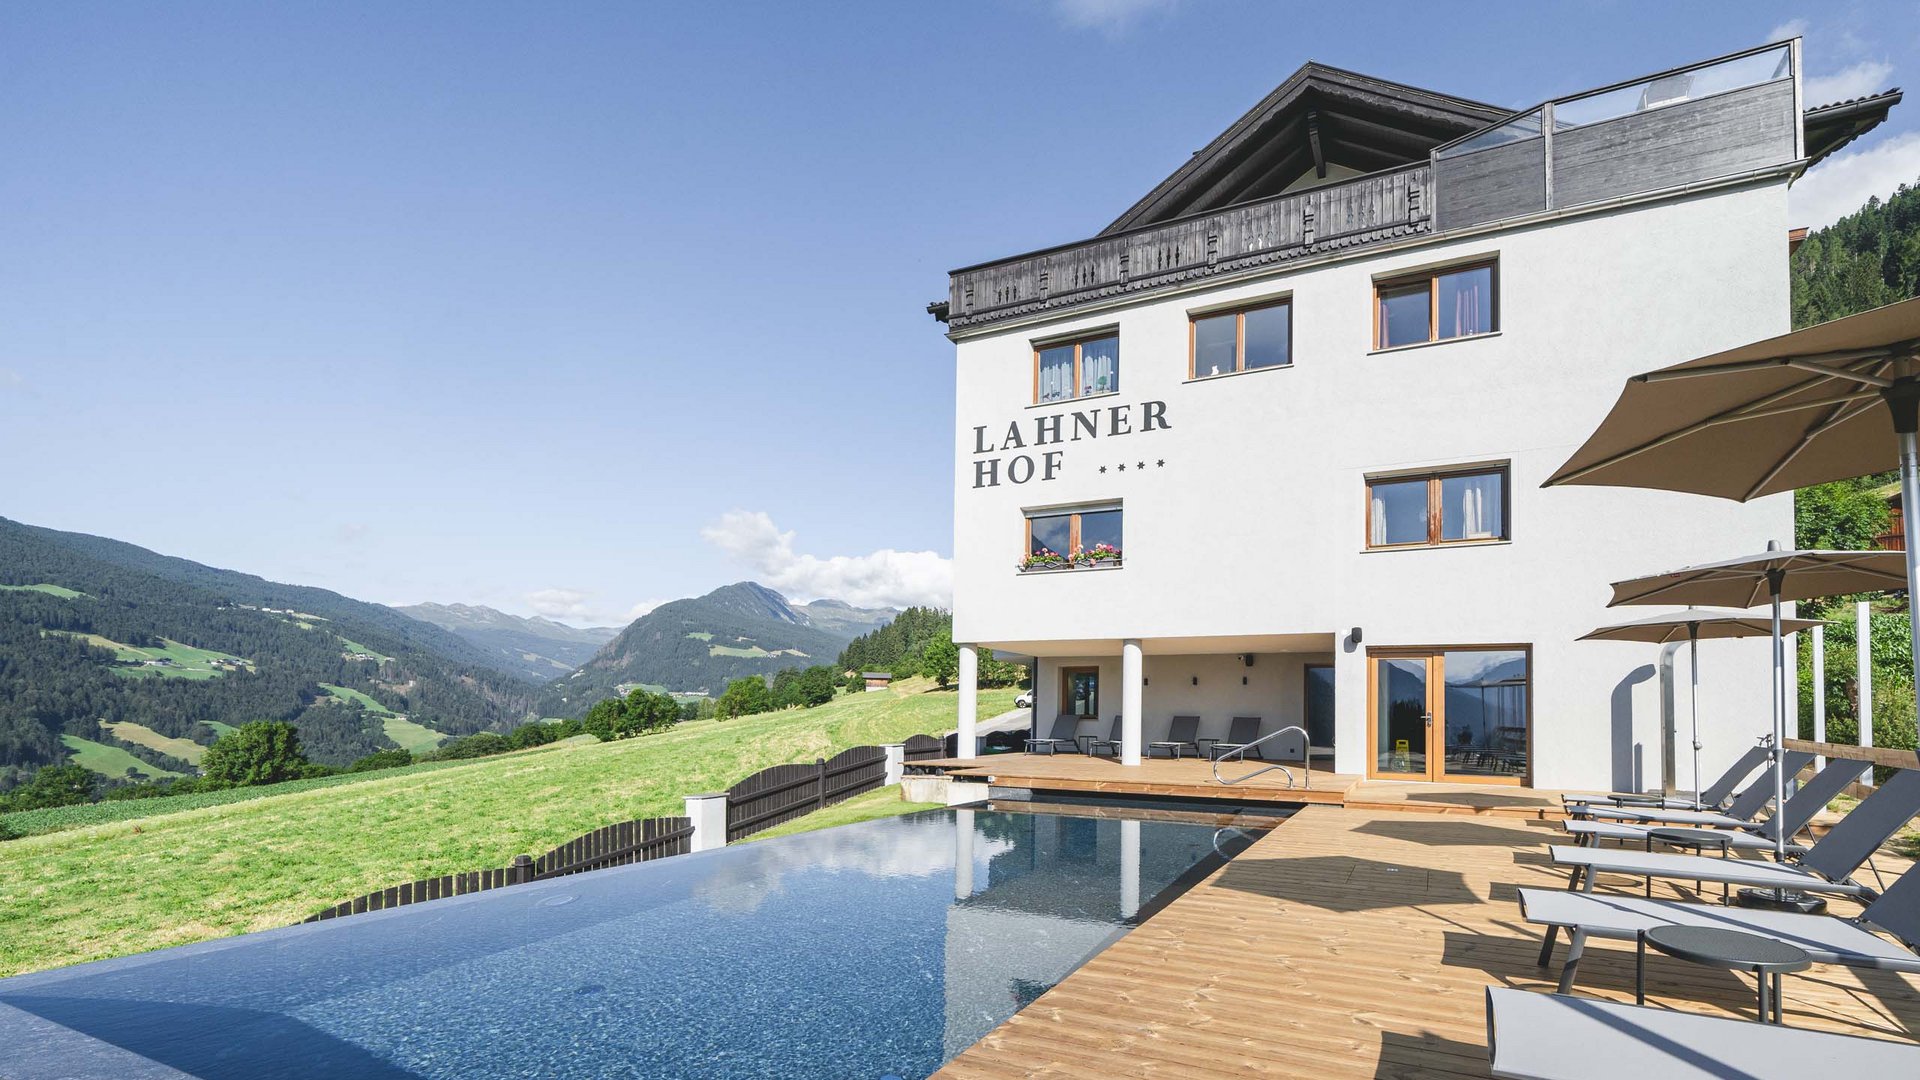 Lahnerhof: our nature and wellness hotel near Sterzing